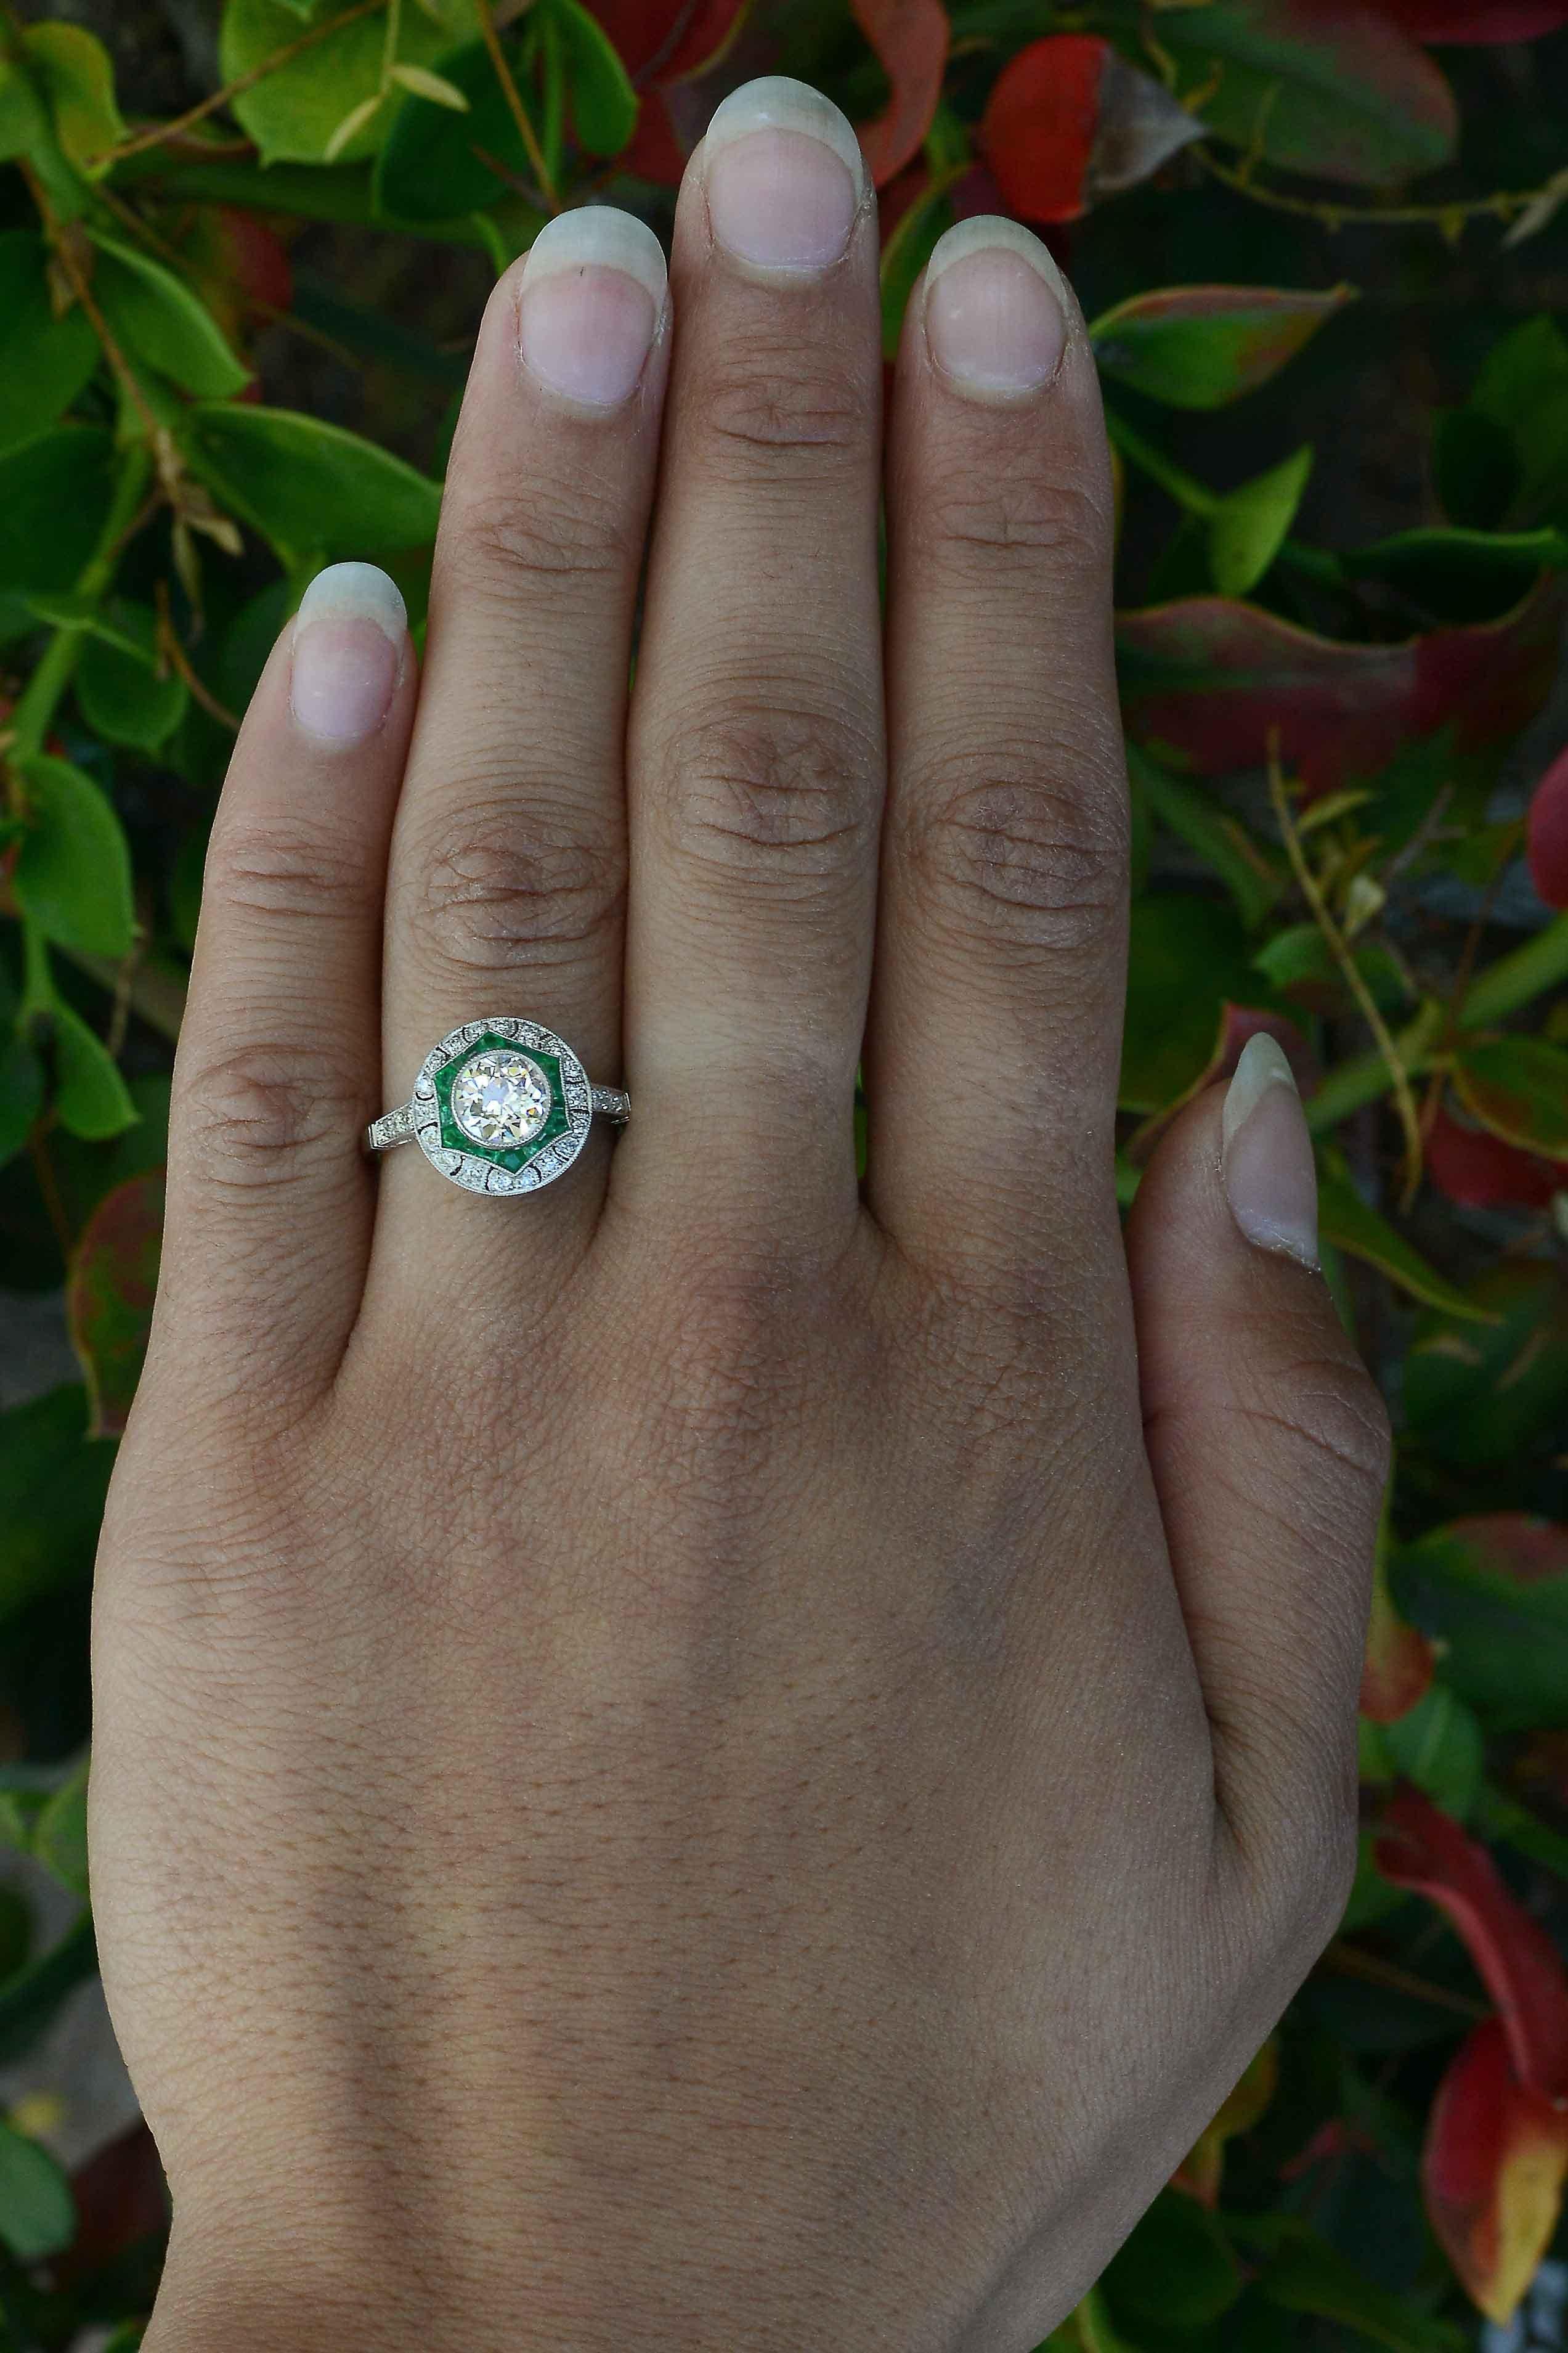 An Antique Diamond and Emerald Engagement Ring inspired by the Art Deco period, the intriguing star design fashioned as a crown dome is centered by a juicy 1.13 carat, 100 year old mine cut brilliant diamond. The large, chunky facets, display a